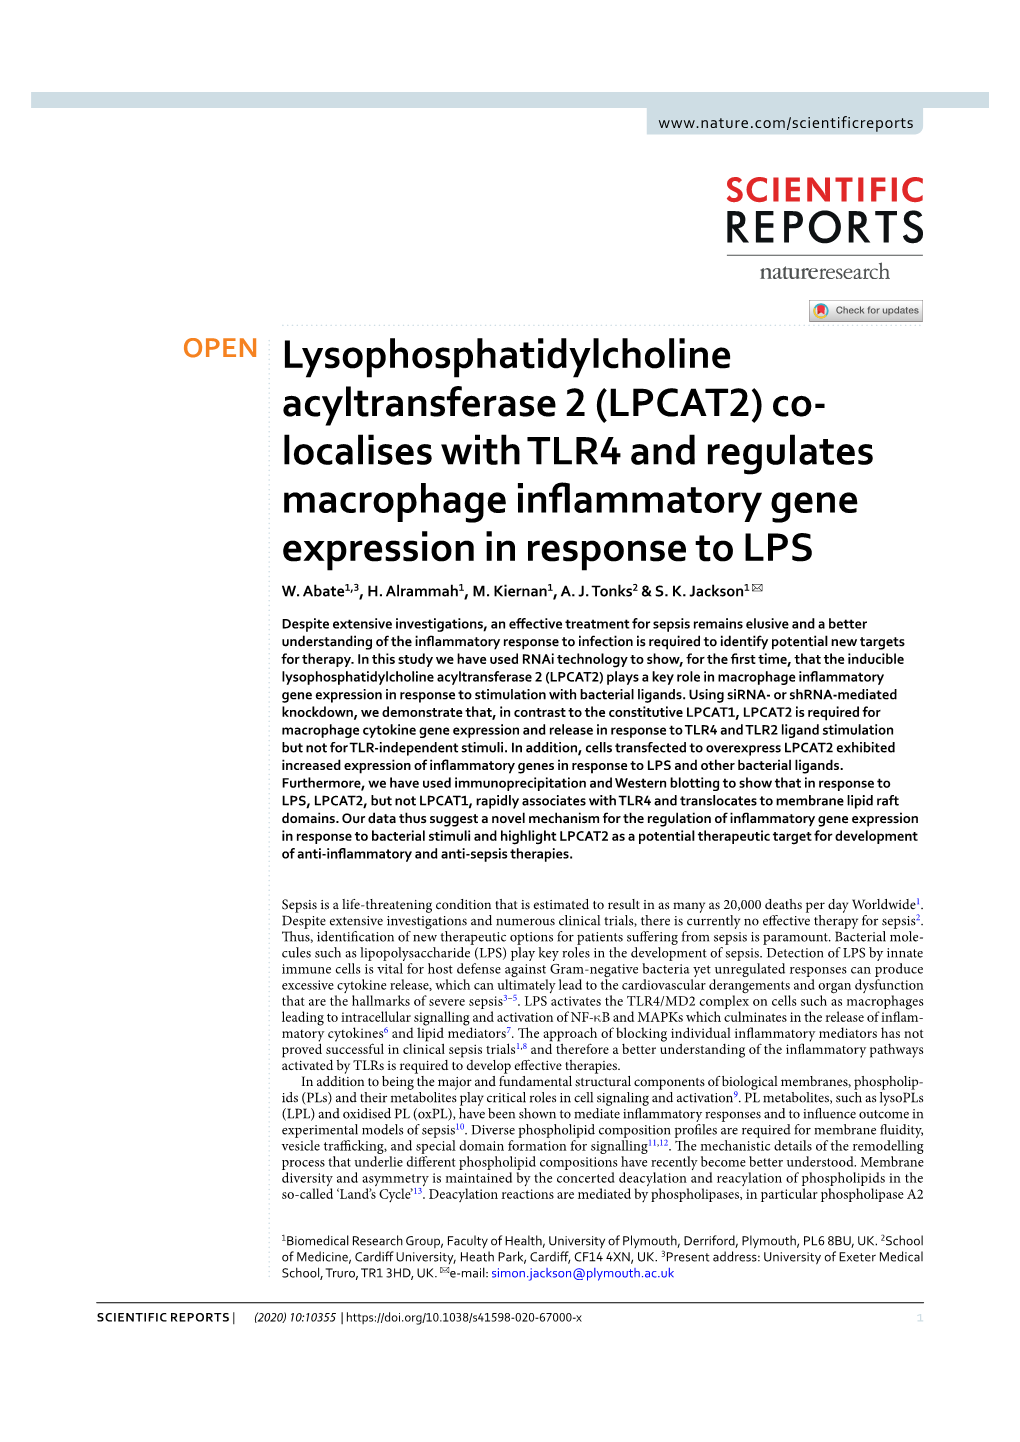 Lysophosphatidylcholine Acyltransferase 2 (LPCAT2) Co- Localises with TLR4 and Regulates Macrophage Infammatory Gene Expression in Response to LPS W